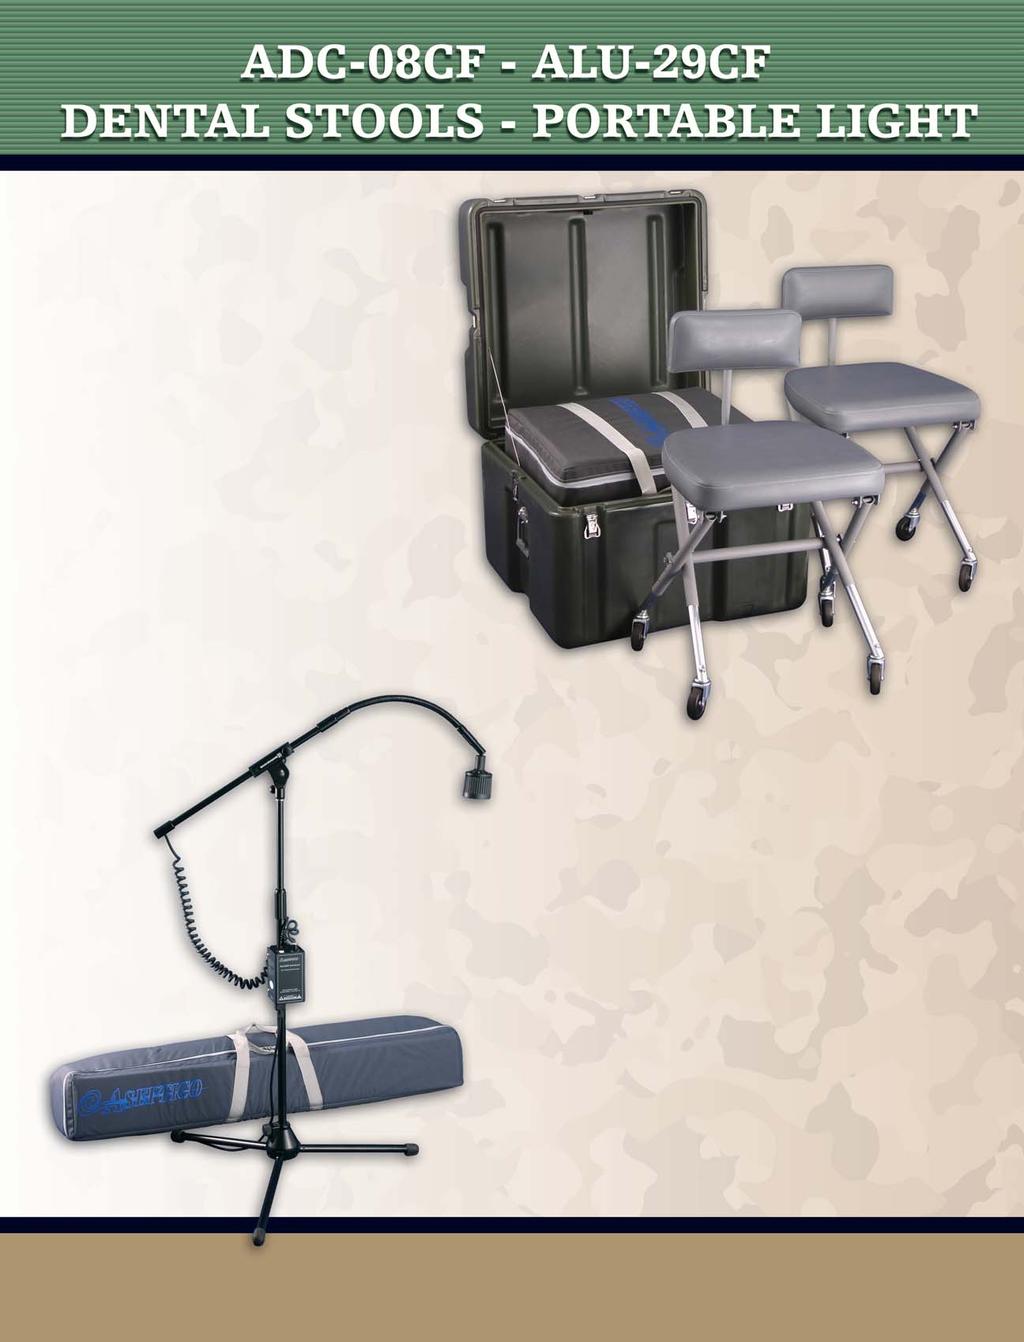 Aseptico portable stools compliment the ADC-01CS portable dental chair. Compact design and durable construction make the ADC-08CF chairs optimum for field deployment.